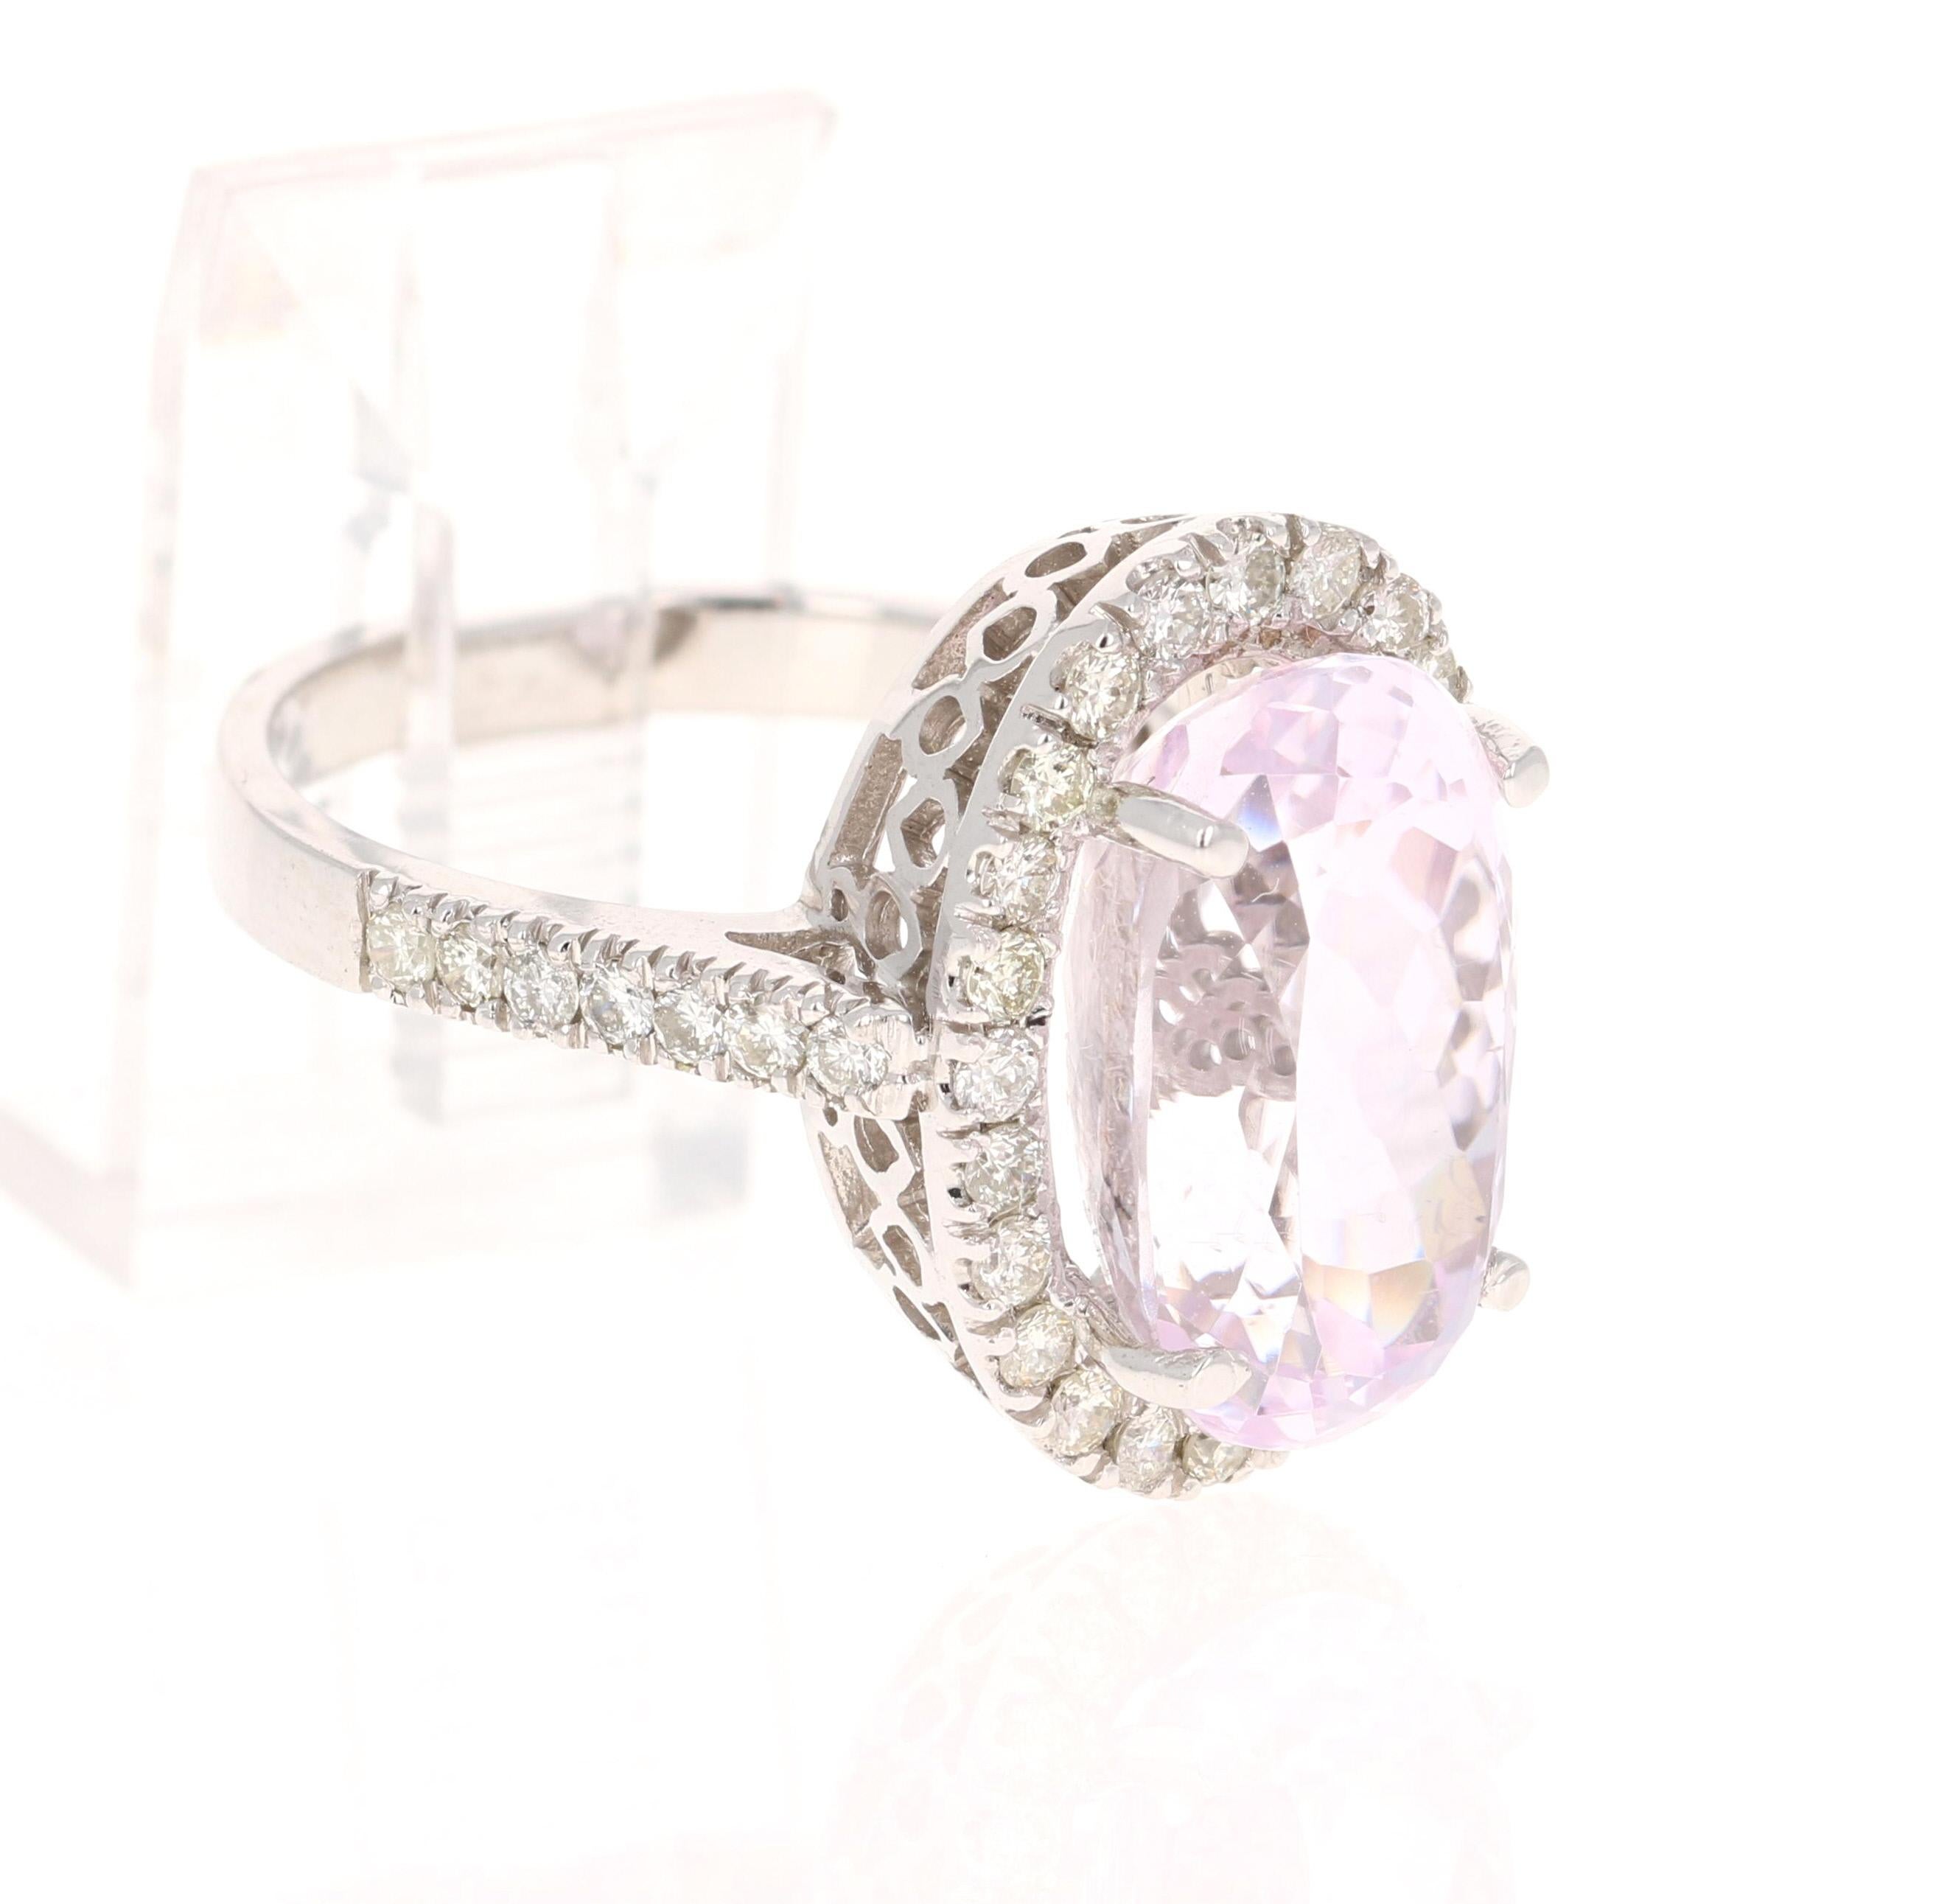 This beauty has a large Oval Cut 10.15 Carat Kunzite and is surrounded by 38 Round Cut Diamonds that weigh 0.84 Carats. (Clarity: SI, Color: F) The total carat weight of the ring is 10.99 Carats.
The Oval Cut Kunzite is 9 mm x 15 mm.
The ring is